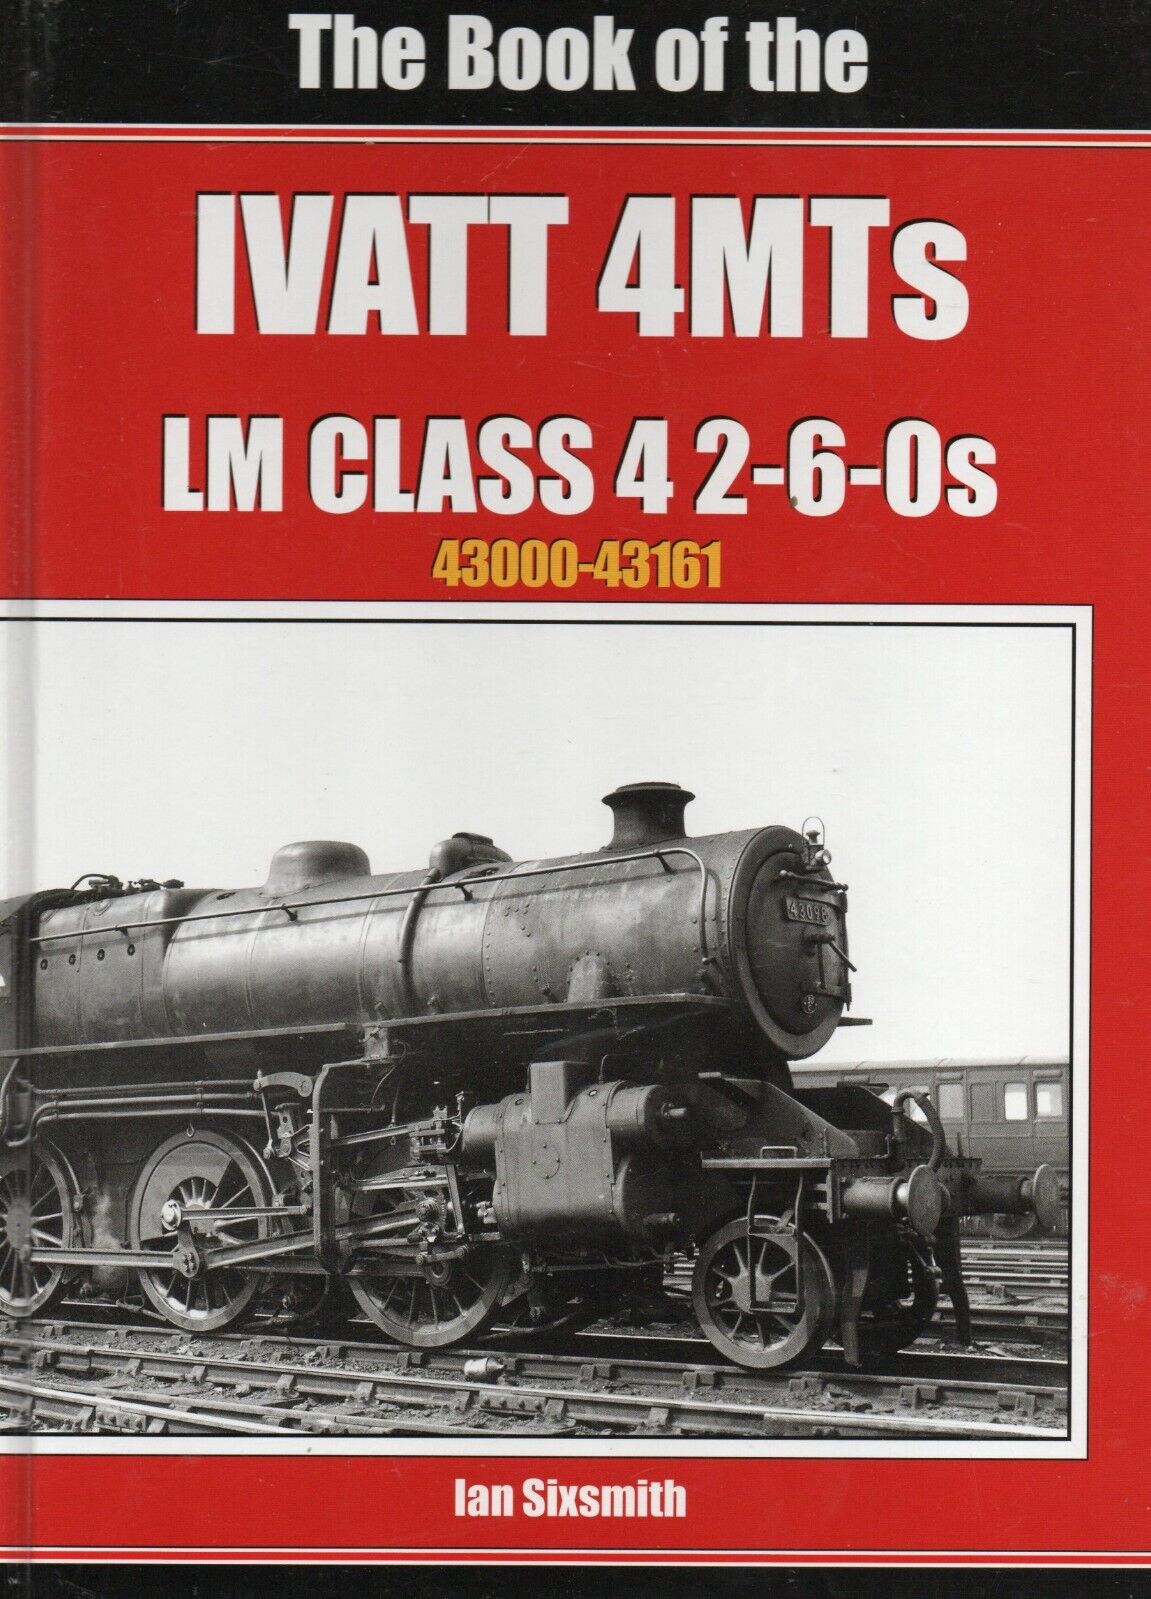 The Book of the IVATT 4MTs LM CLASS 4 2-6-0s 43000 - 43161